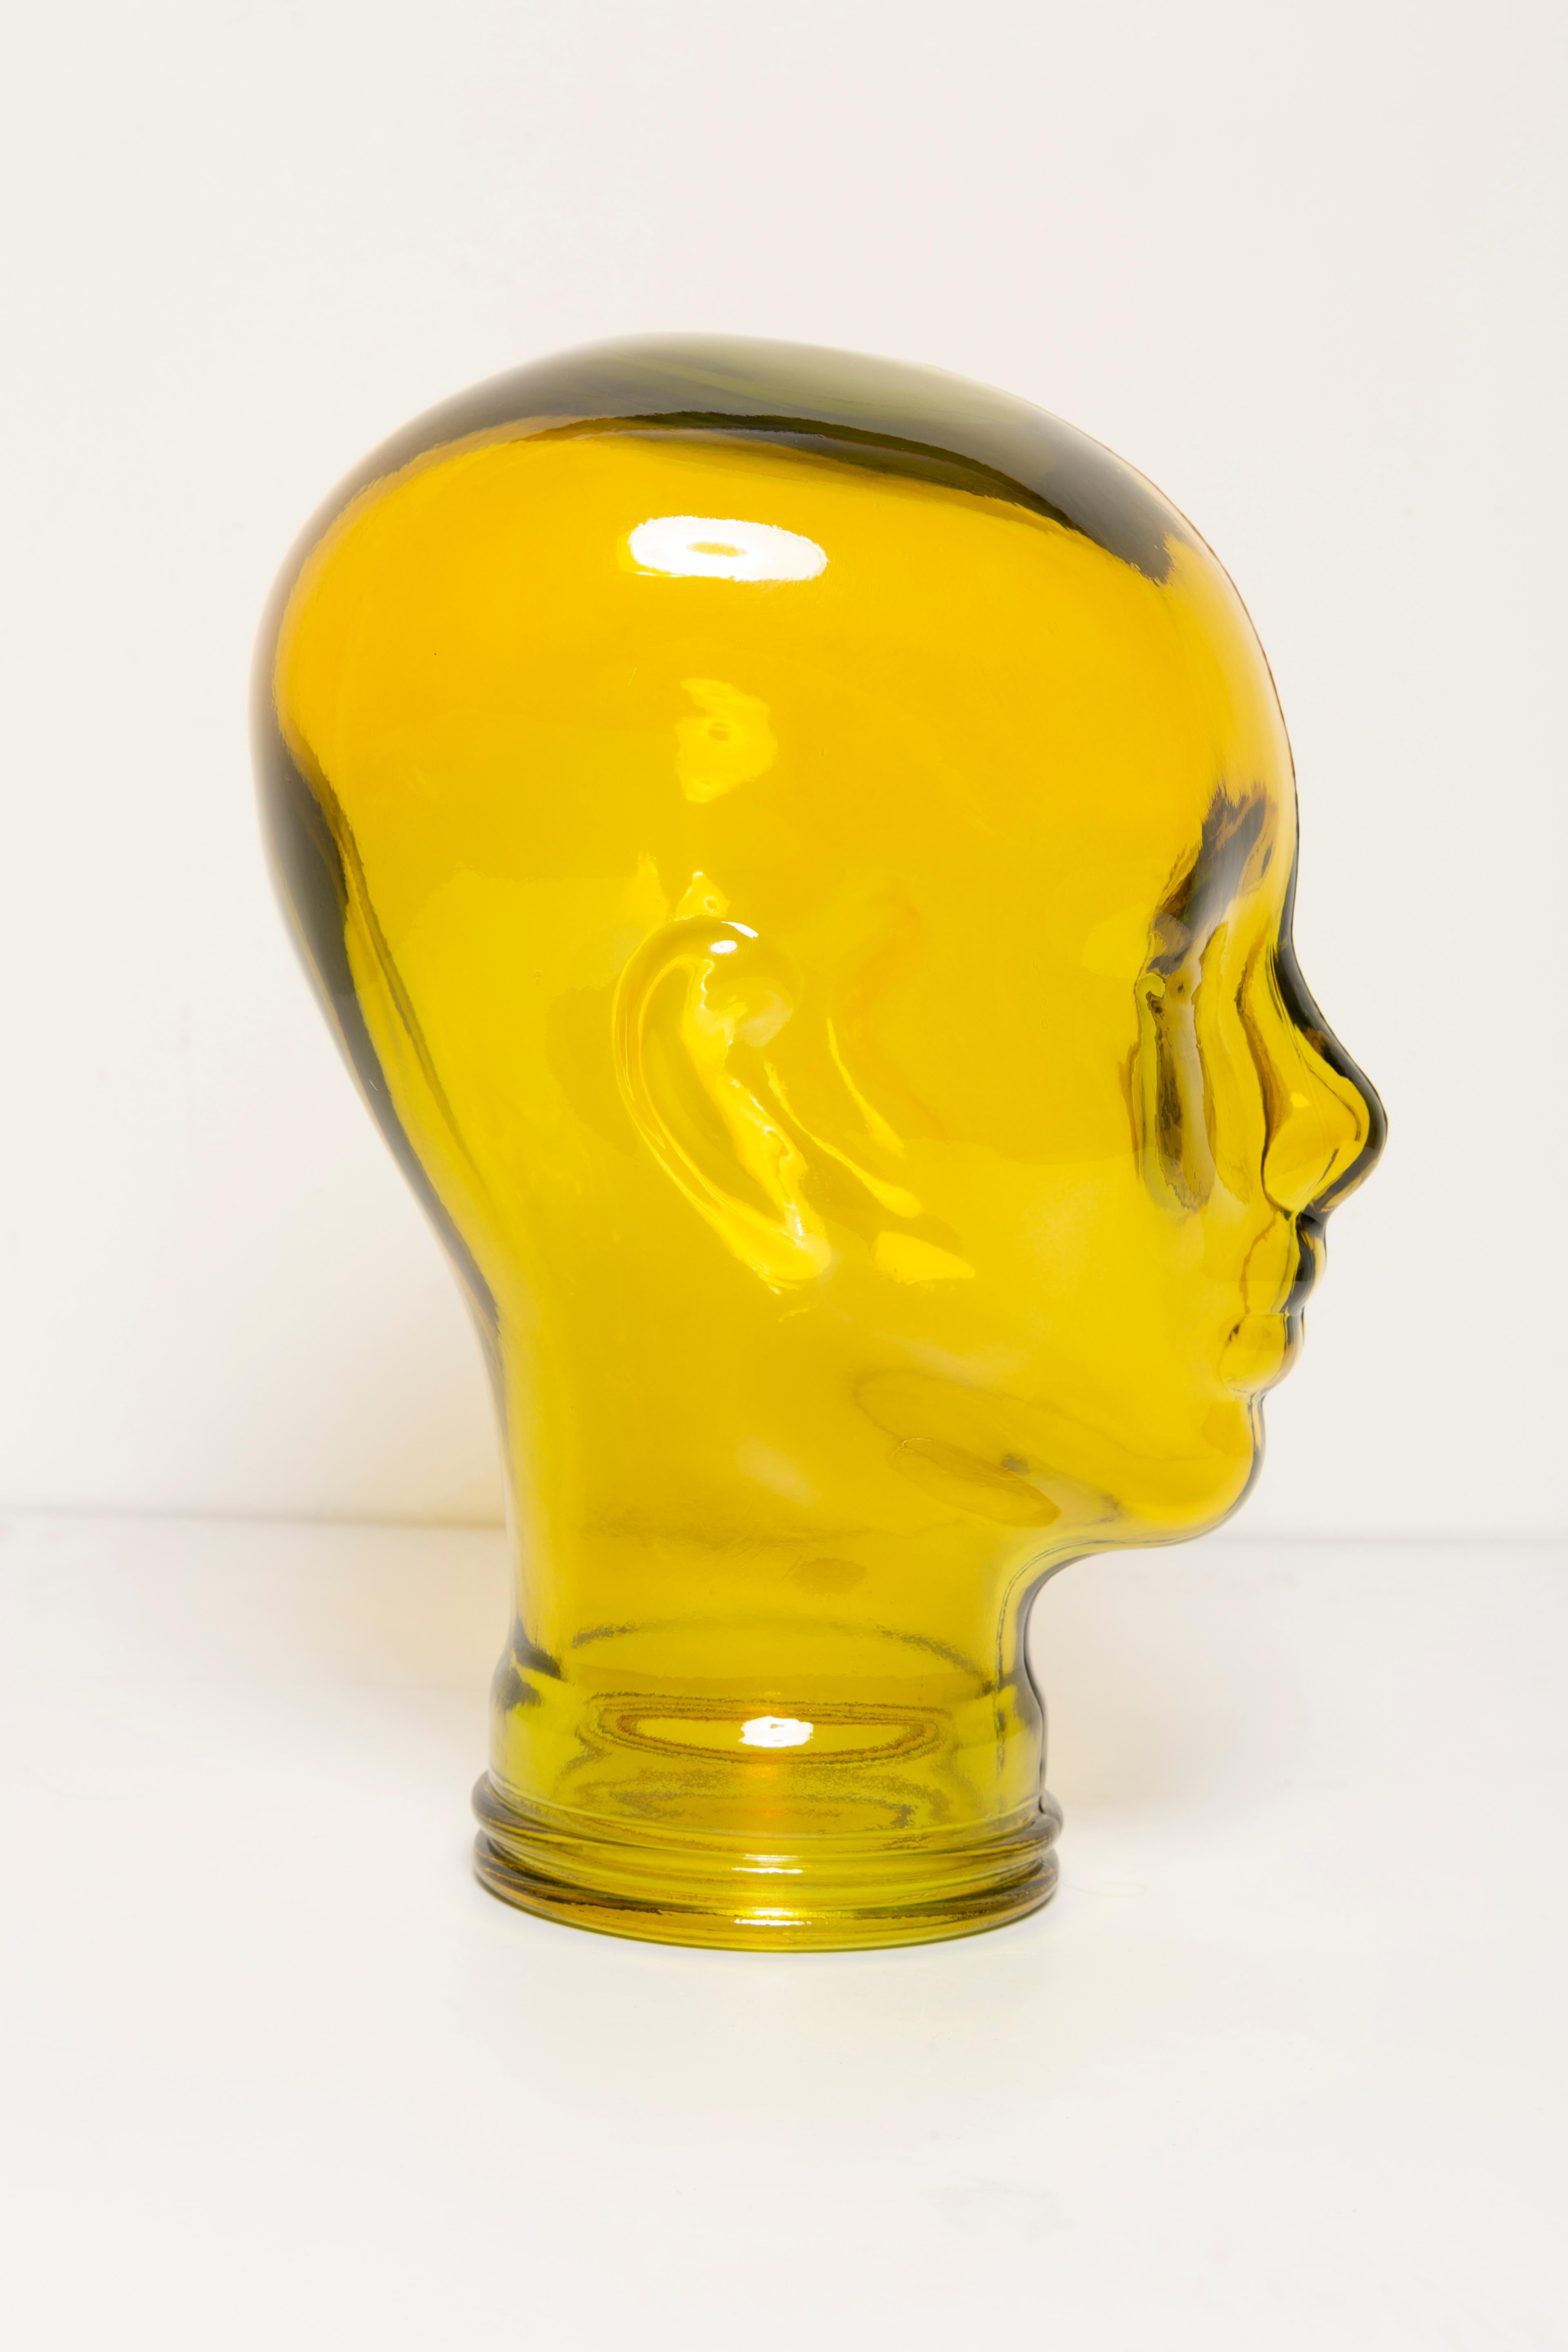 20th Century Yellow Vintage Decorative Mannequin Glass Head Sculpture, 1970s, Germany For Sale